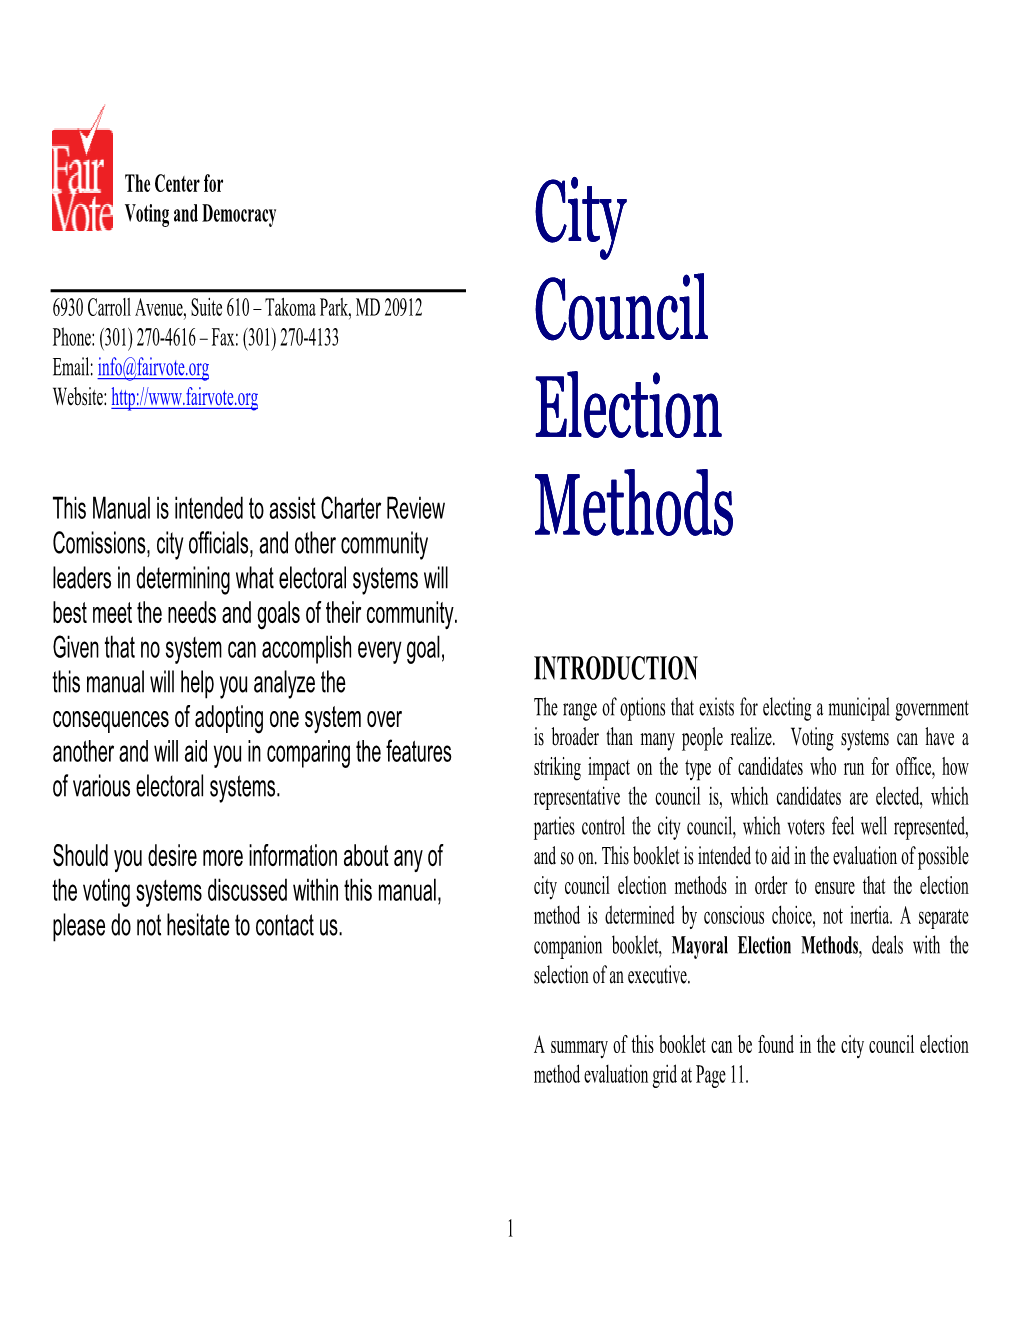 City Council Election Methods in Order to Ensure That the Election Please Do Not Hesitate to Contact Us